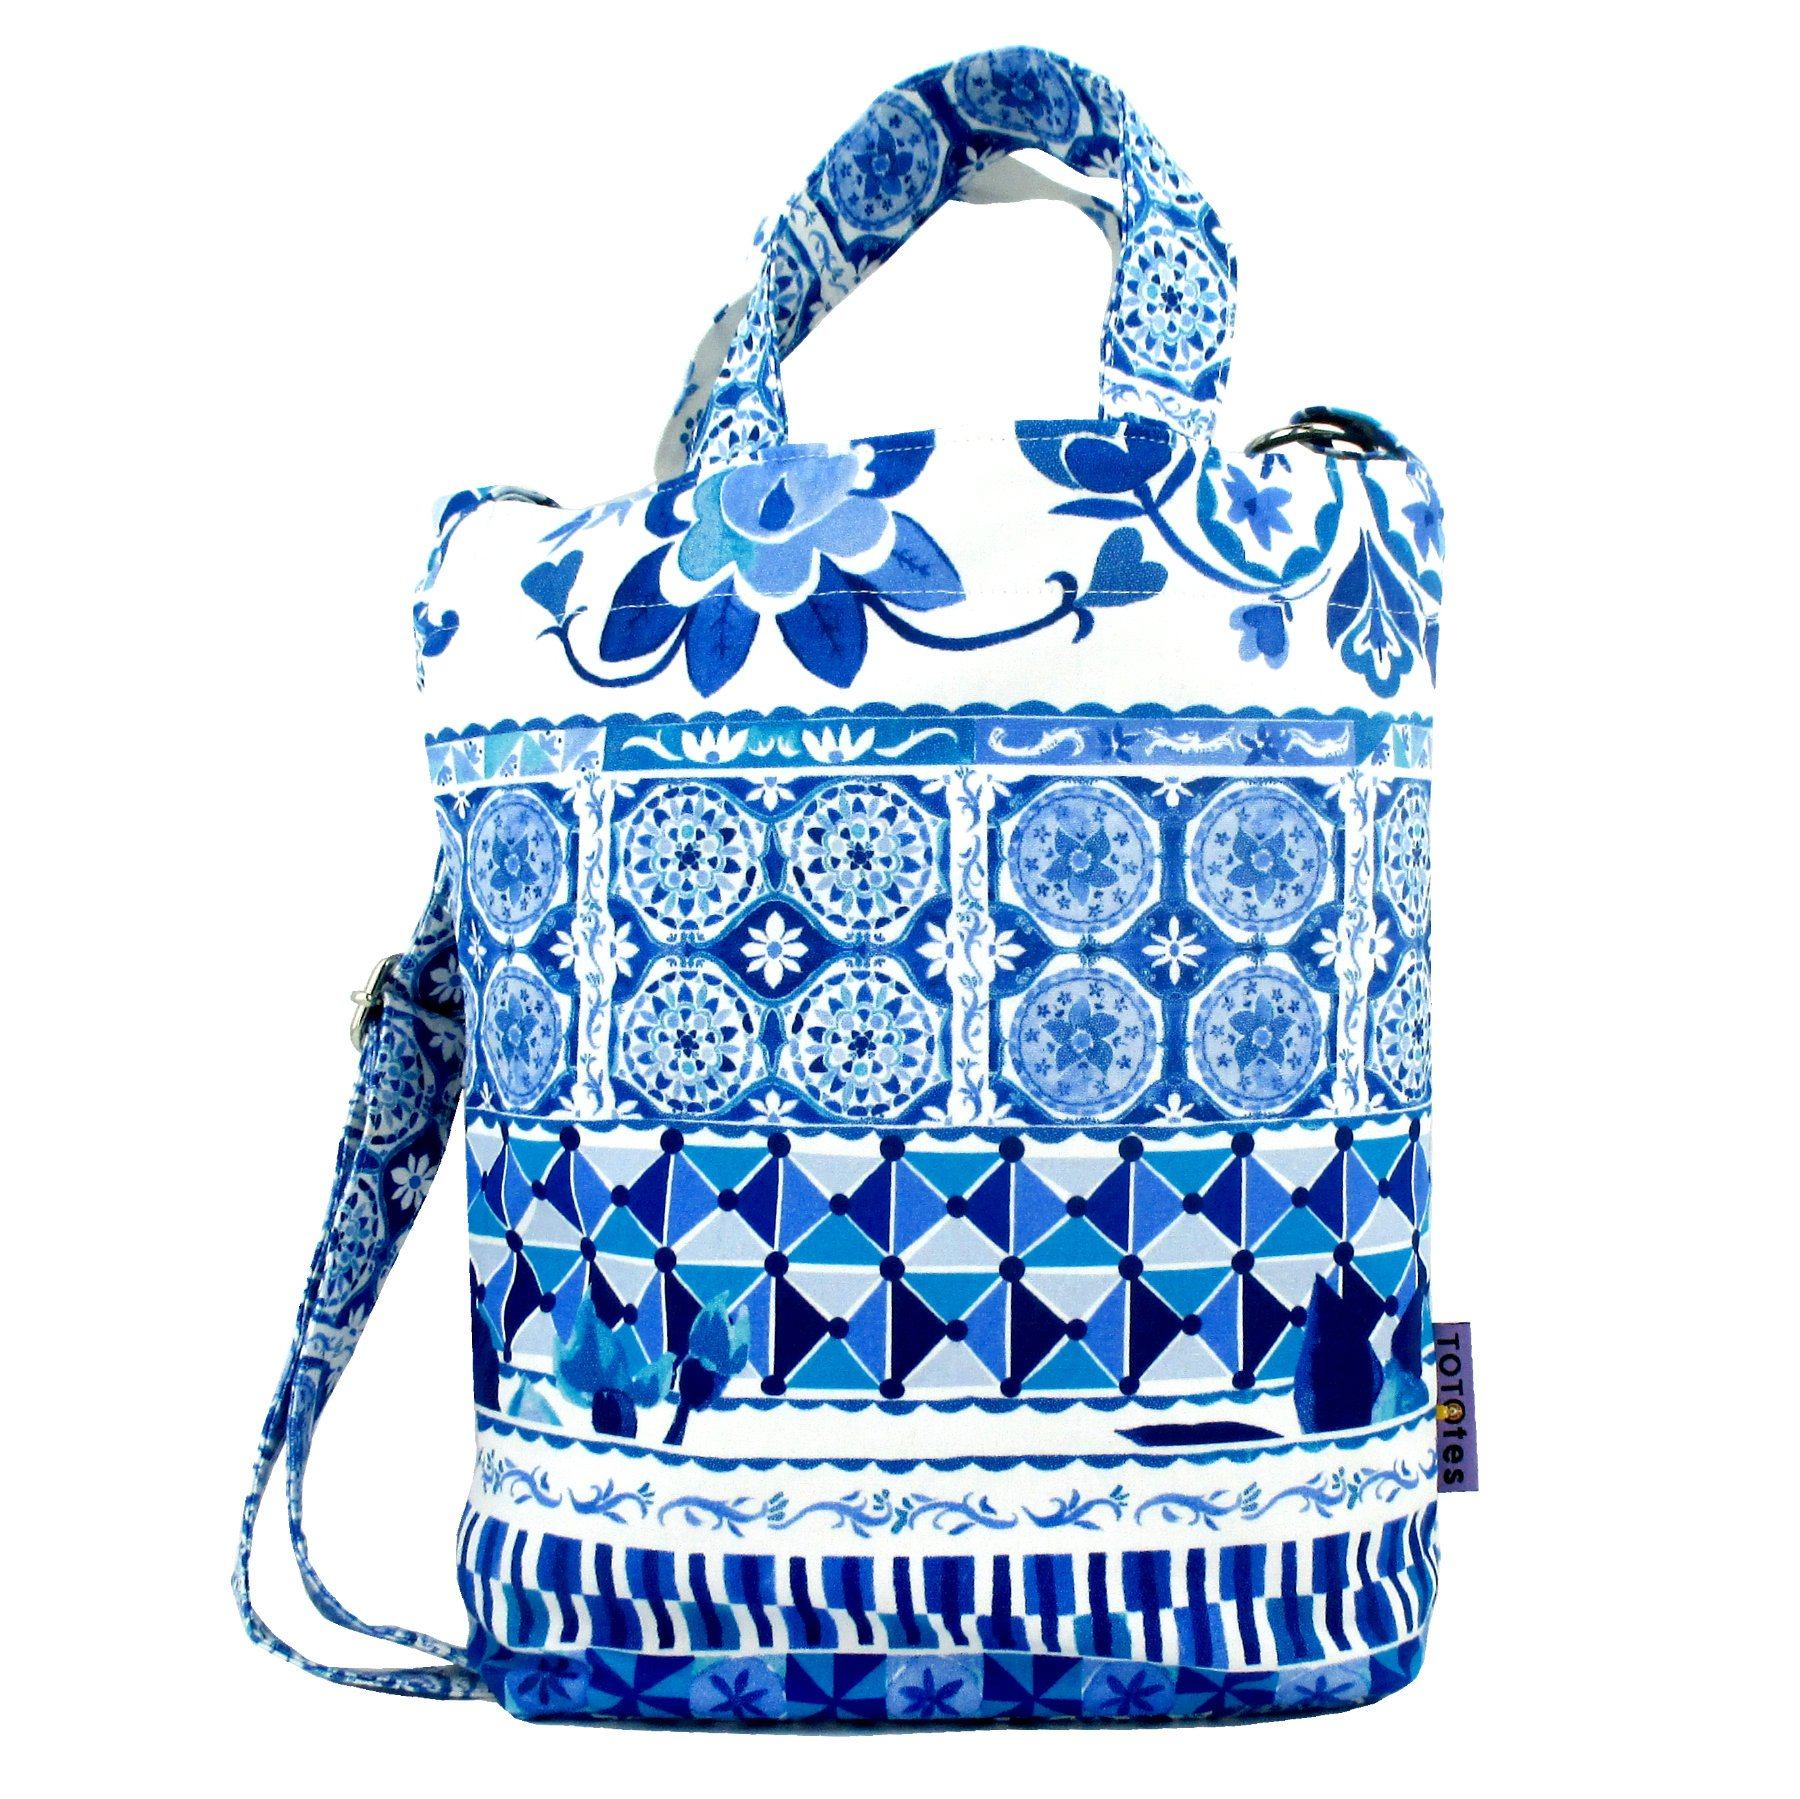 Bright Blue Paisley Floral Mosaic Tiles Patterned Print Duck Cross Body Tote Bag